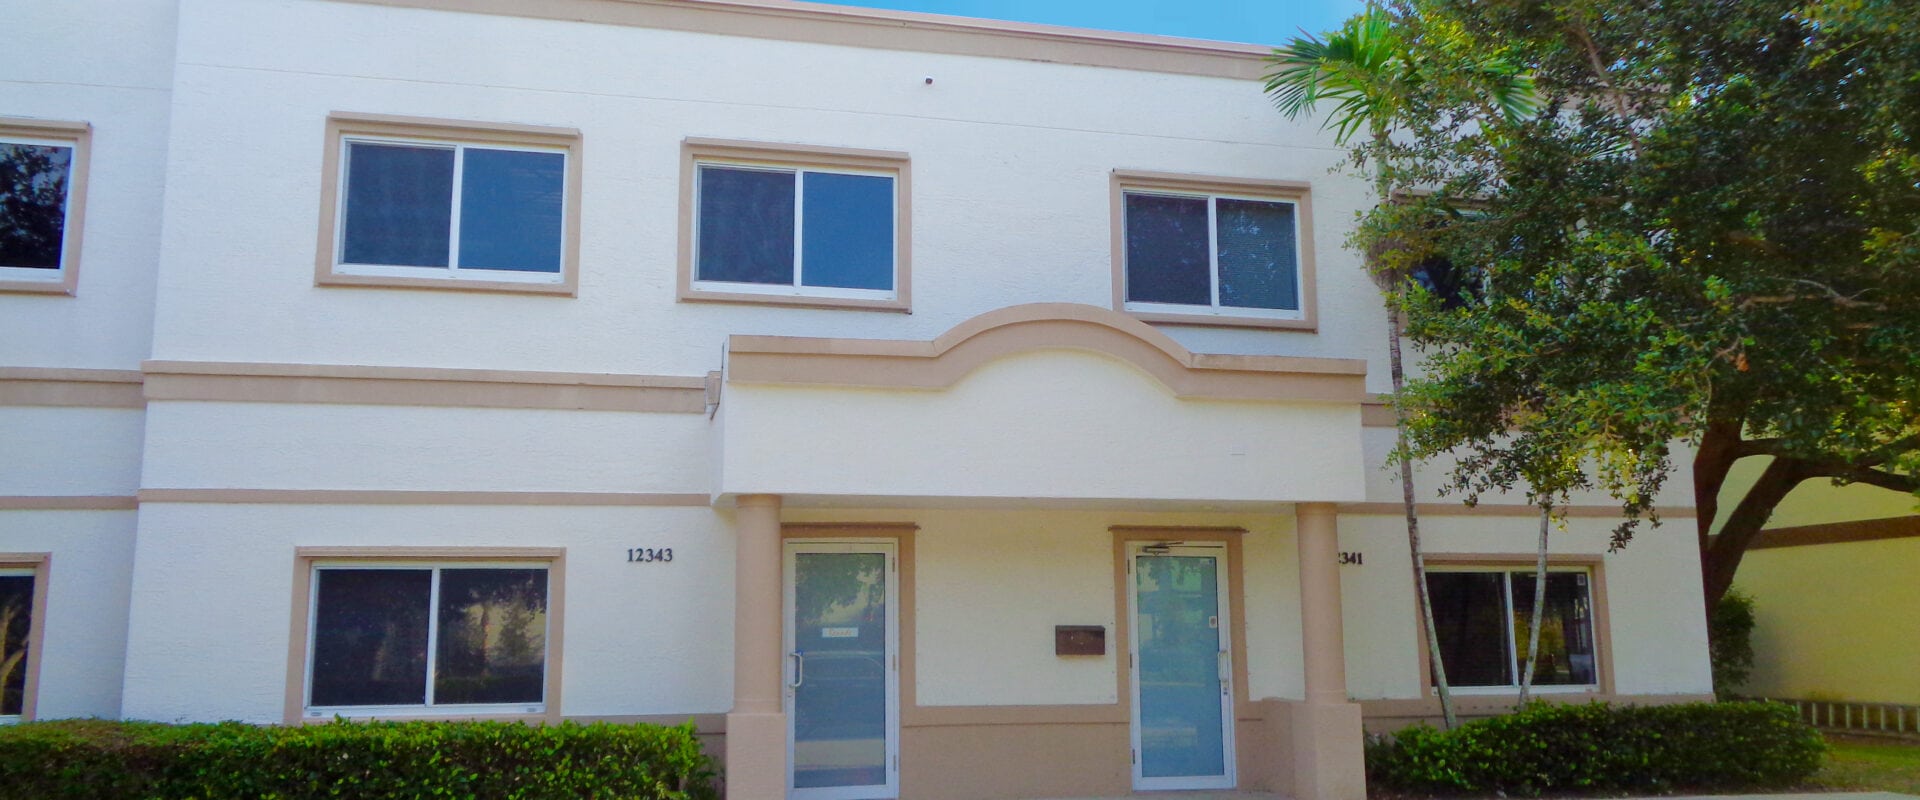 For Sale Office/Warehouse 2,405 SF – Coral Springs